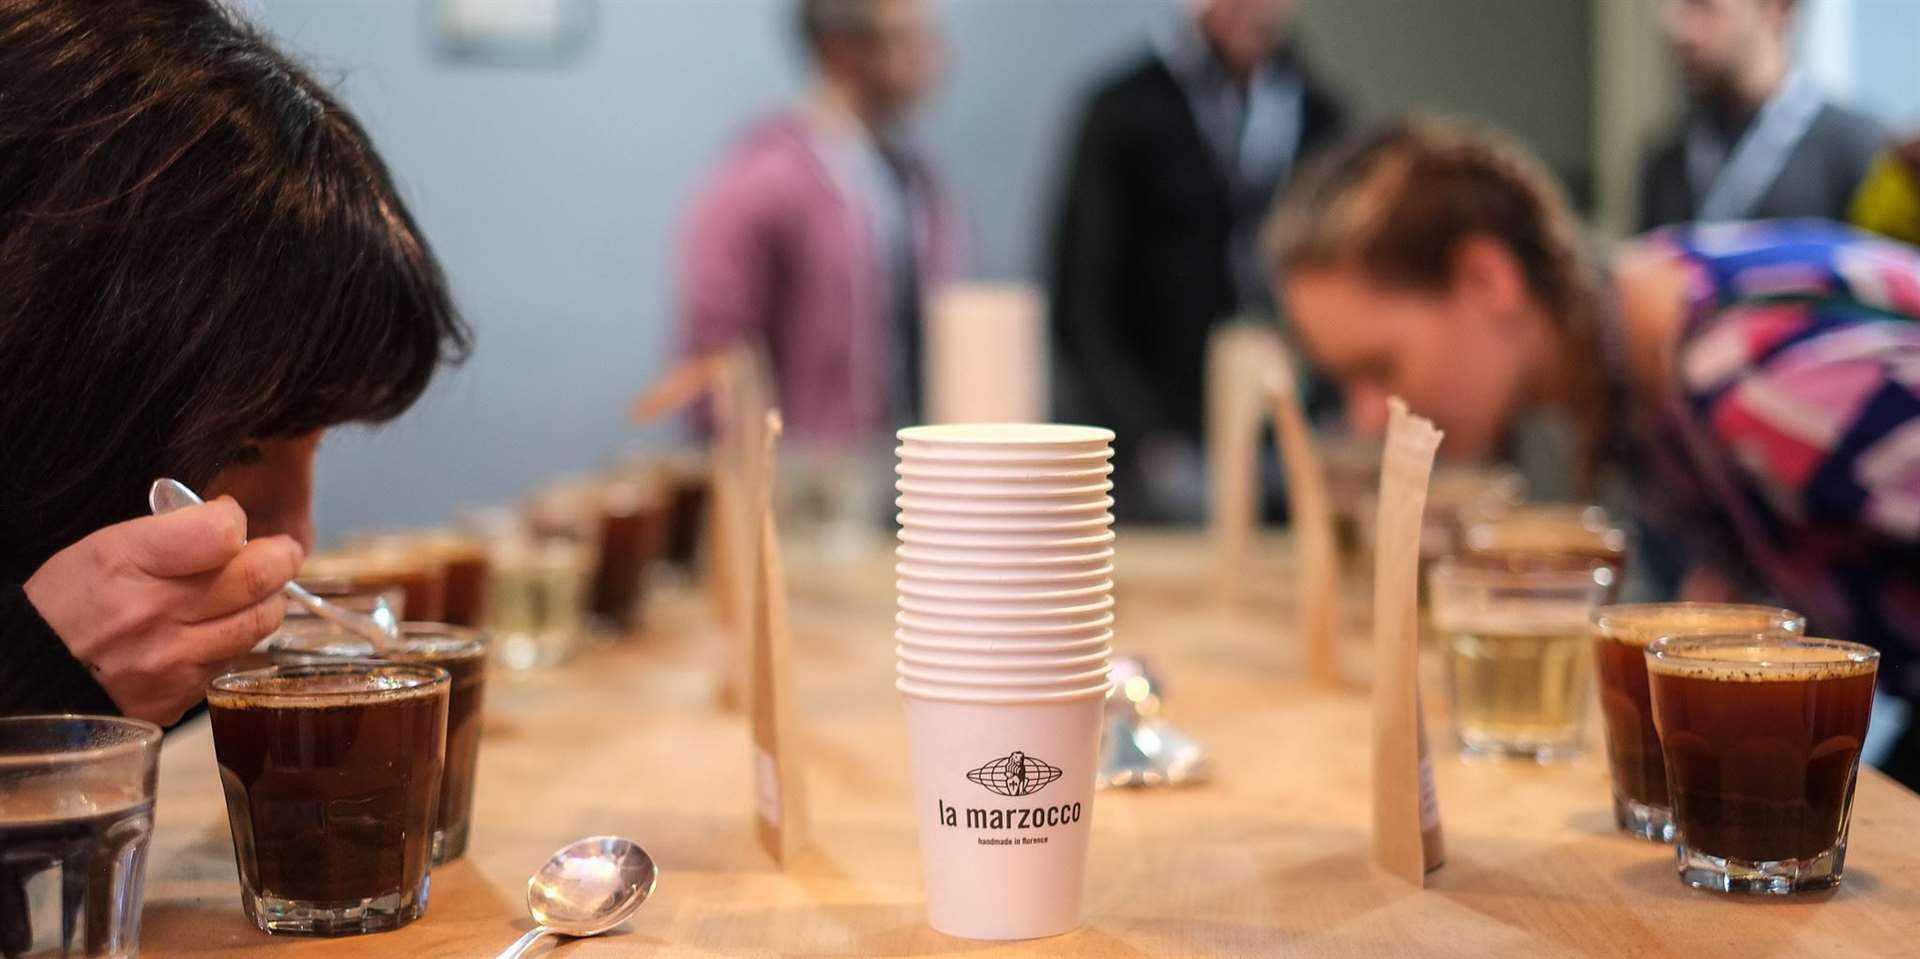 Out of the Box is a destination event, rich in content that aims to bring together the local community, as well as out of town visitors, to celebrate La Marzocco's shared passion of speciality coffee, food and drink.